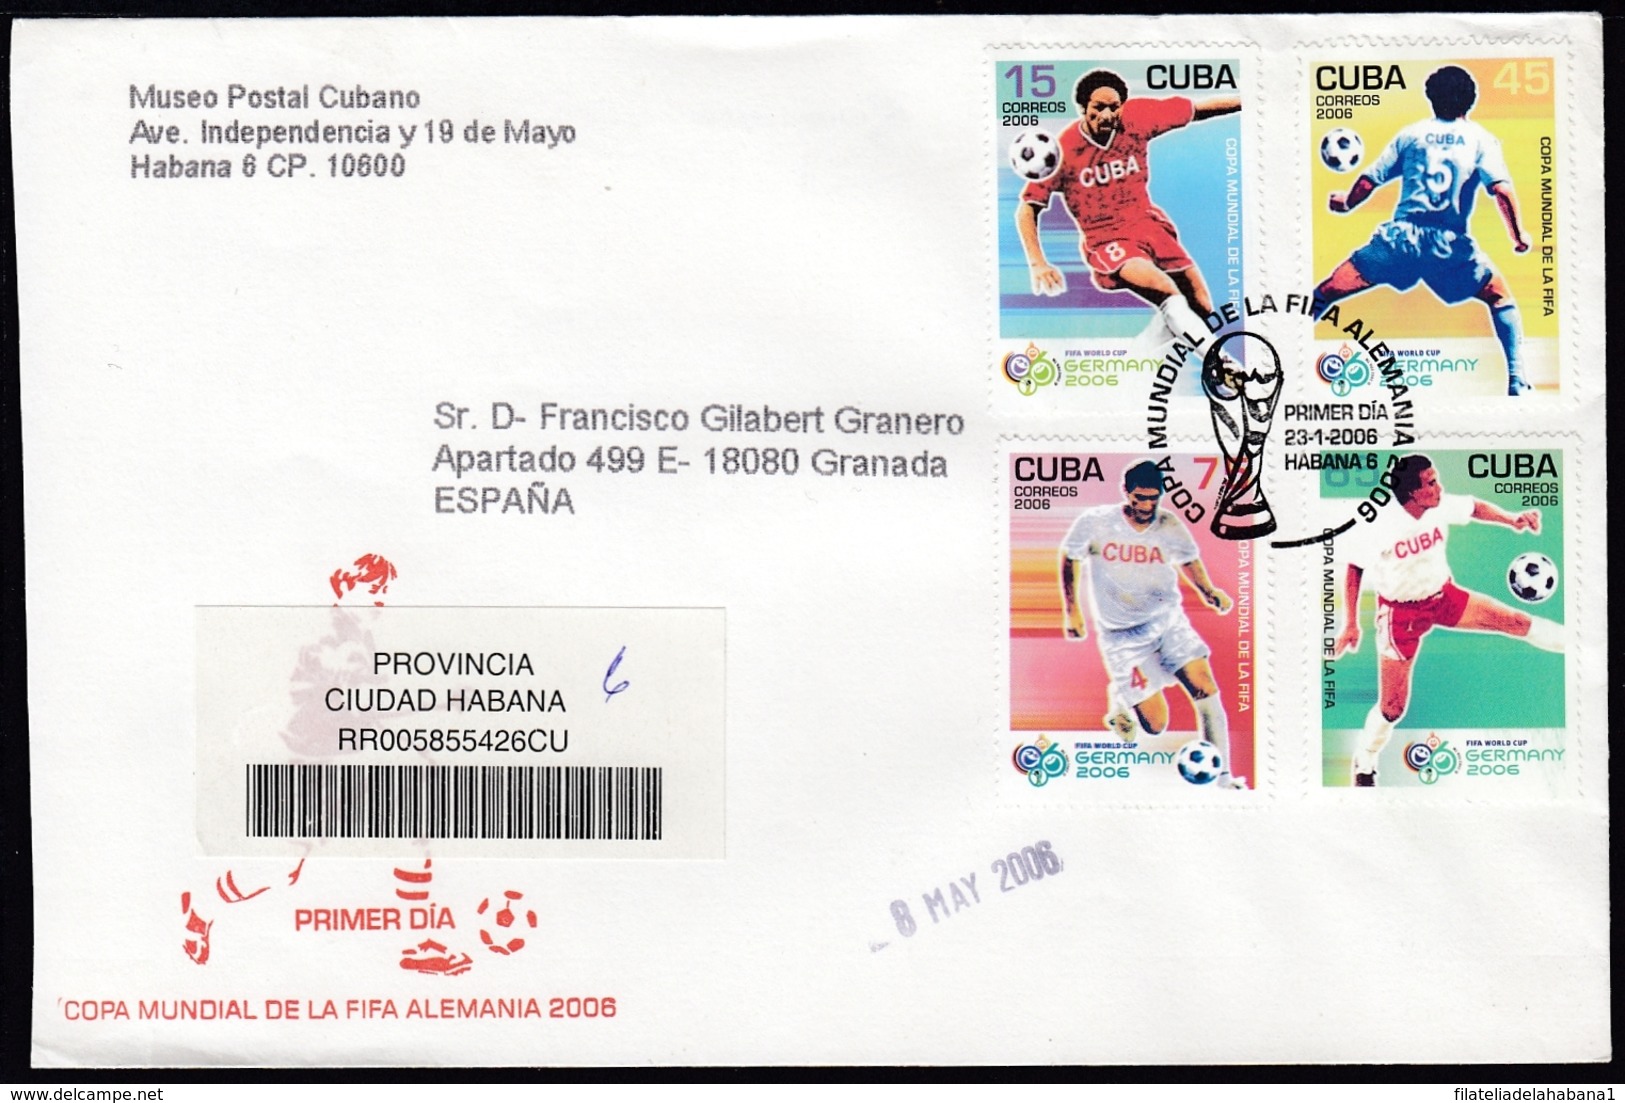 2006-FDC-134 CUBA FDC 2006. REGISTERED COVER TO SPAIN. COPA MUNDIAL FUTBOL ALEMANIA, SOCCER WORLD CUP GERMANY. - FDC